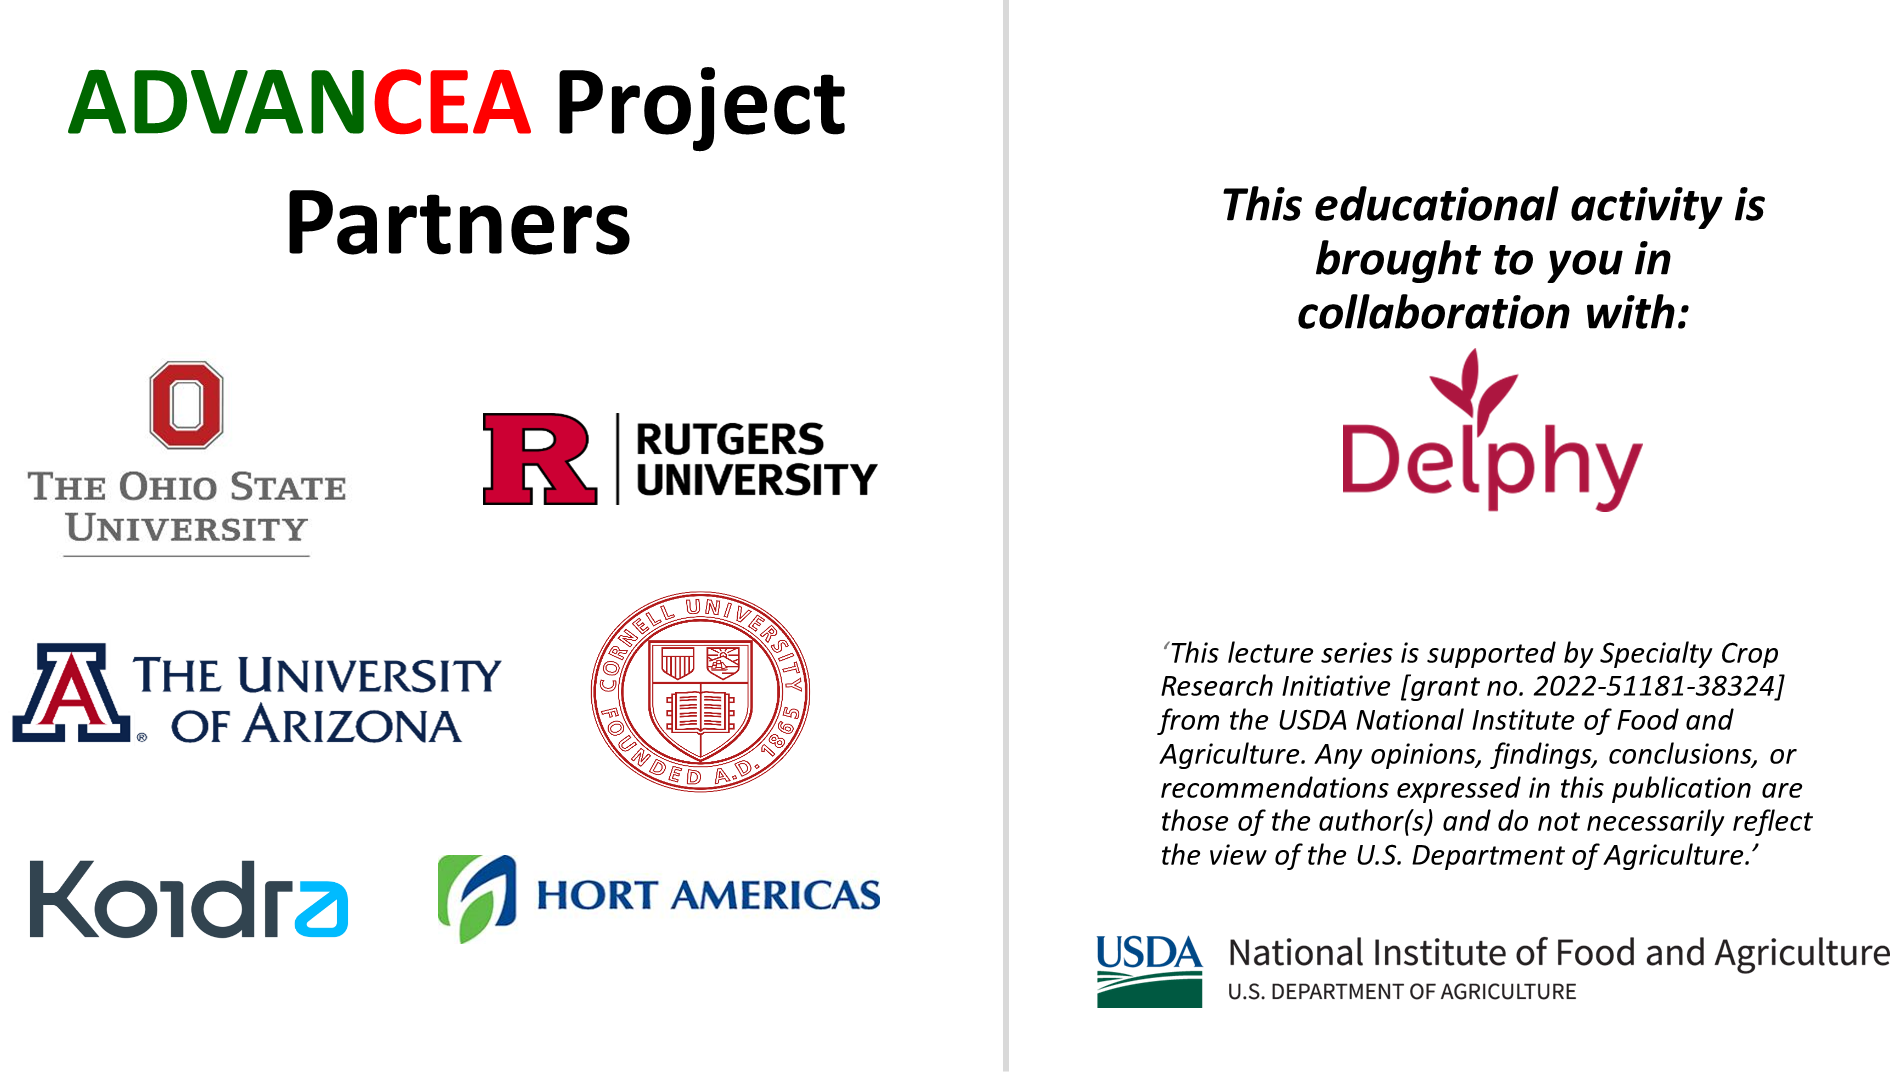 ADVANCEA Project Partners: The Ohio State University, Rutgers University, The University of Arizona, Koidra, Hort Americas. This educational activity is brought to you in collaboration with Delphy. 'This lecture series is supported by Specialty Crop Research Initiative [grant no. 2022-51181-38324] from the USDA National Institute of Food and Agriculture. Any opinions, findings, conclusions, or recommendations expressed in this publication are those of the author(s) and do not necessarily reflect the view of the U.S. Department of Agriculture.'<br />
